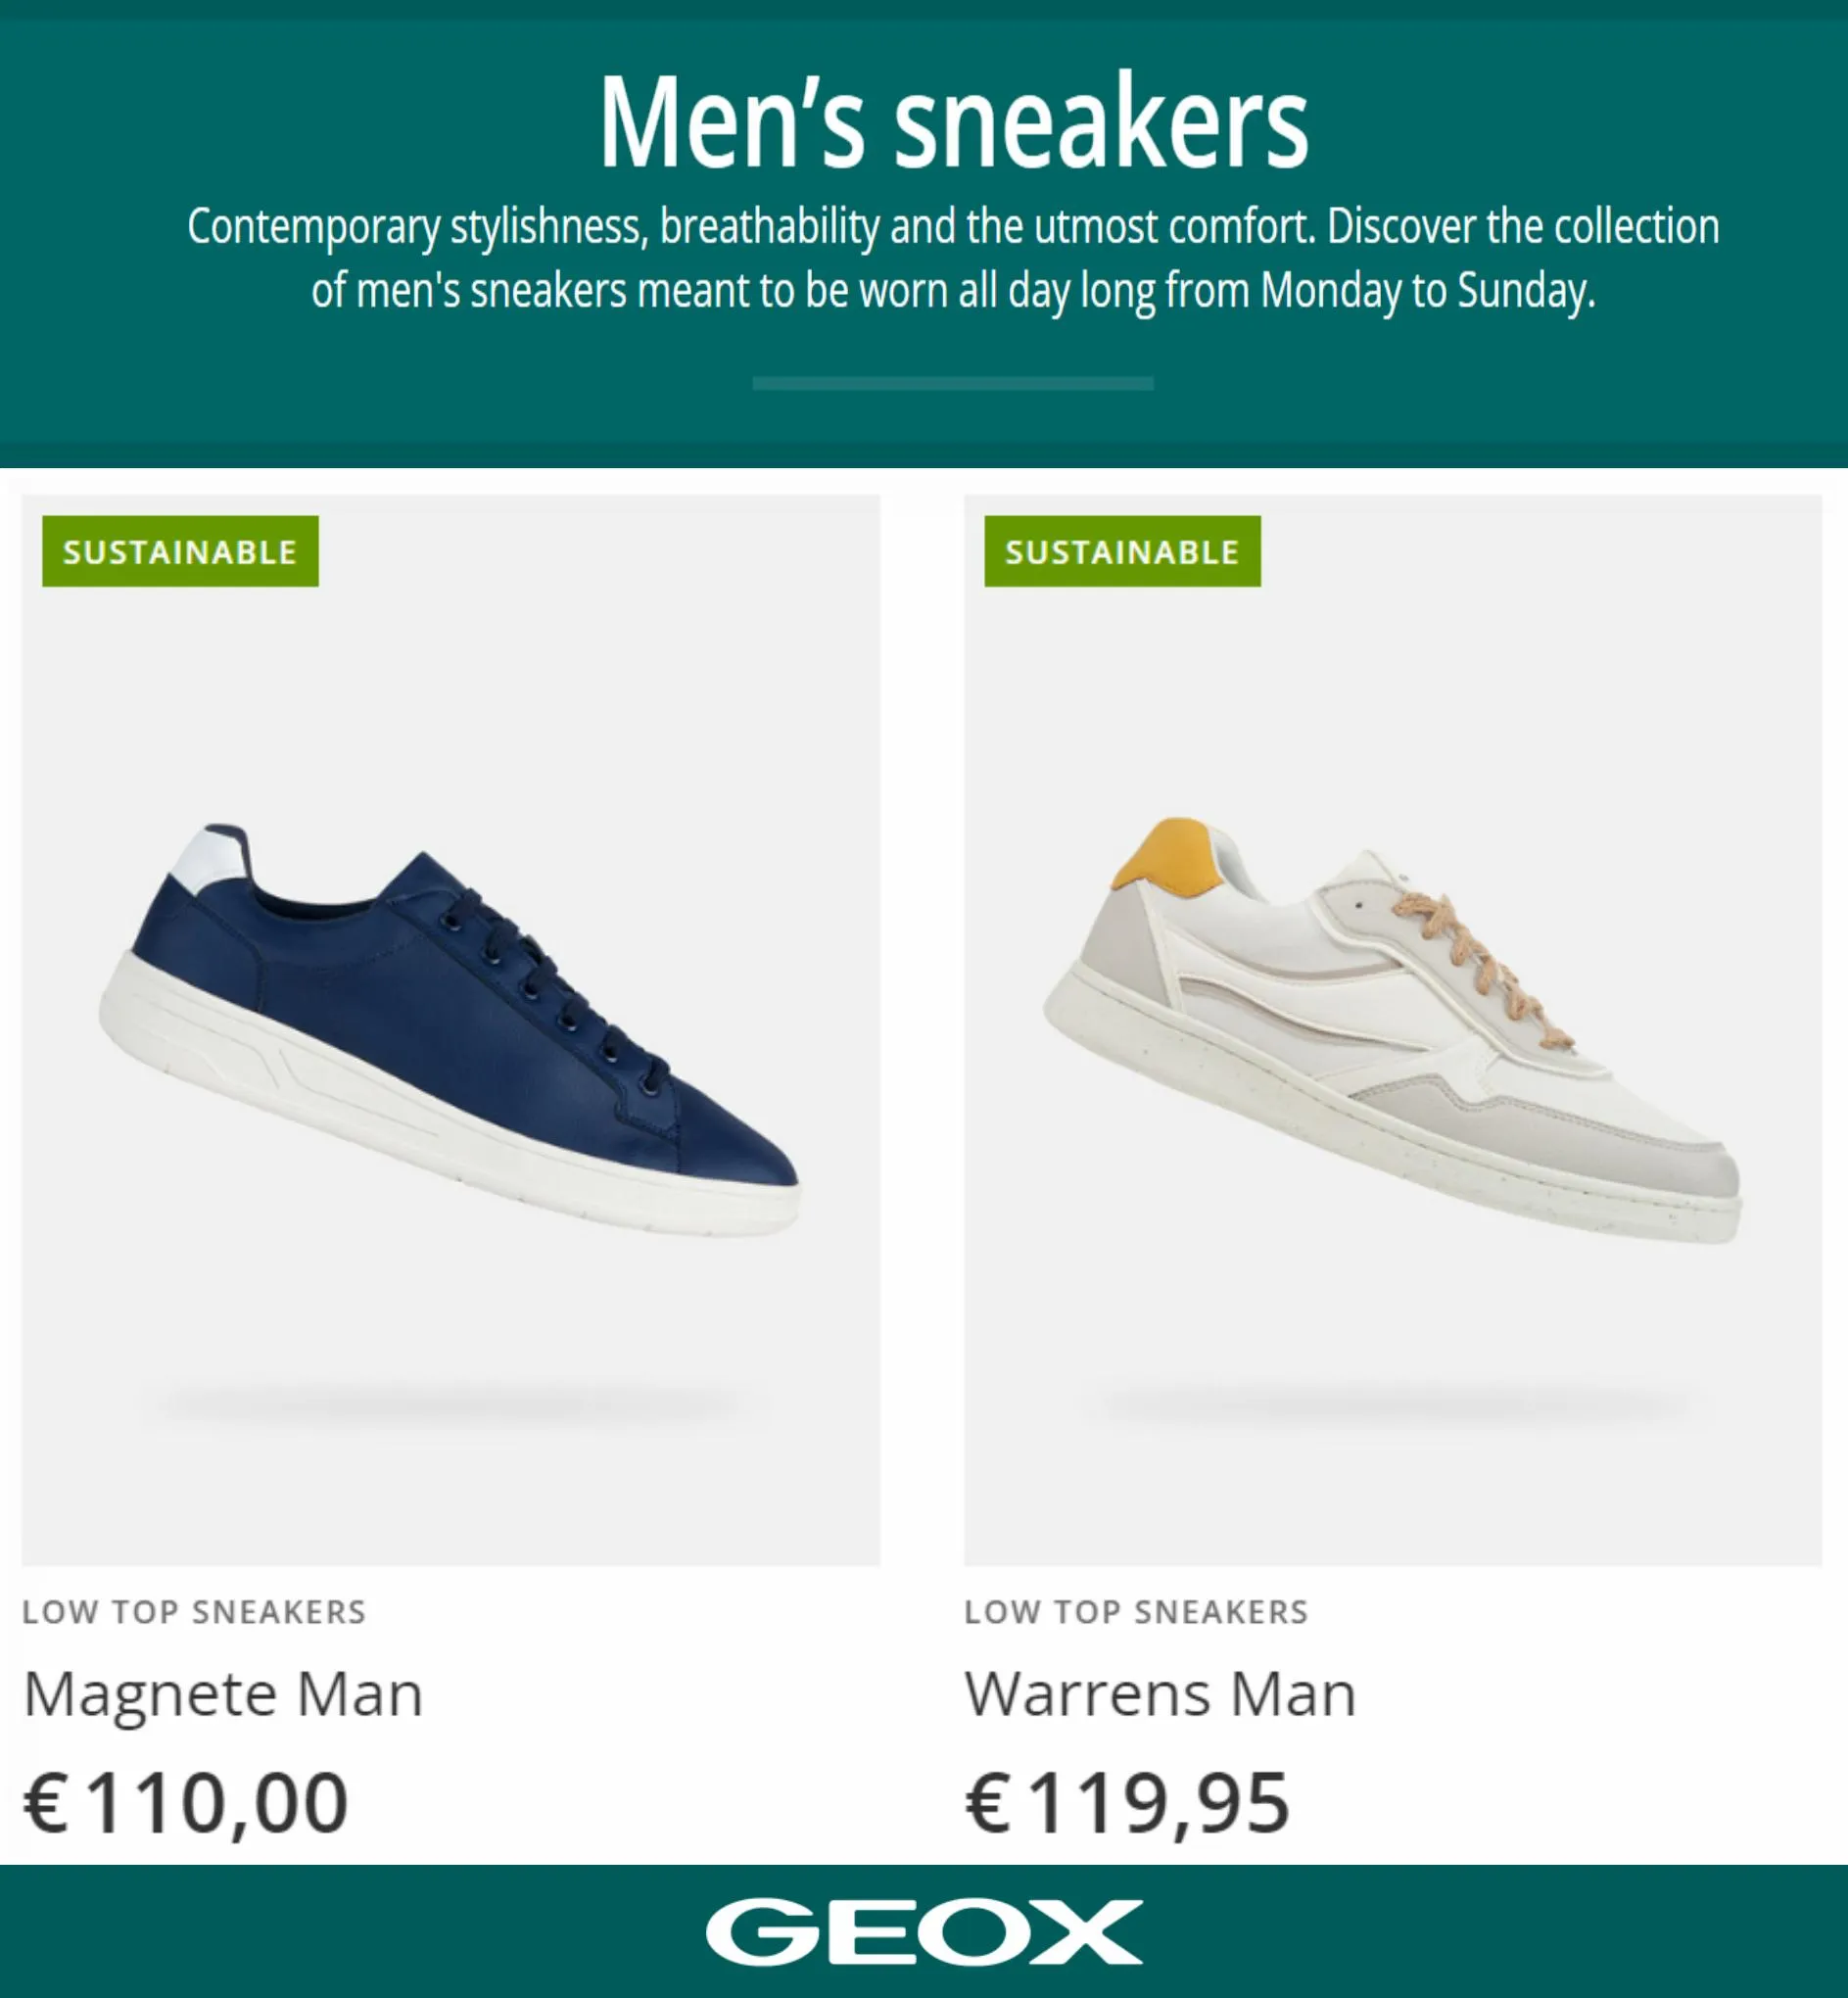 Catalogue Men's Sneakers, page 00006